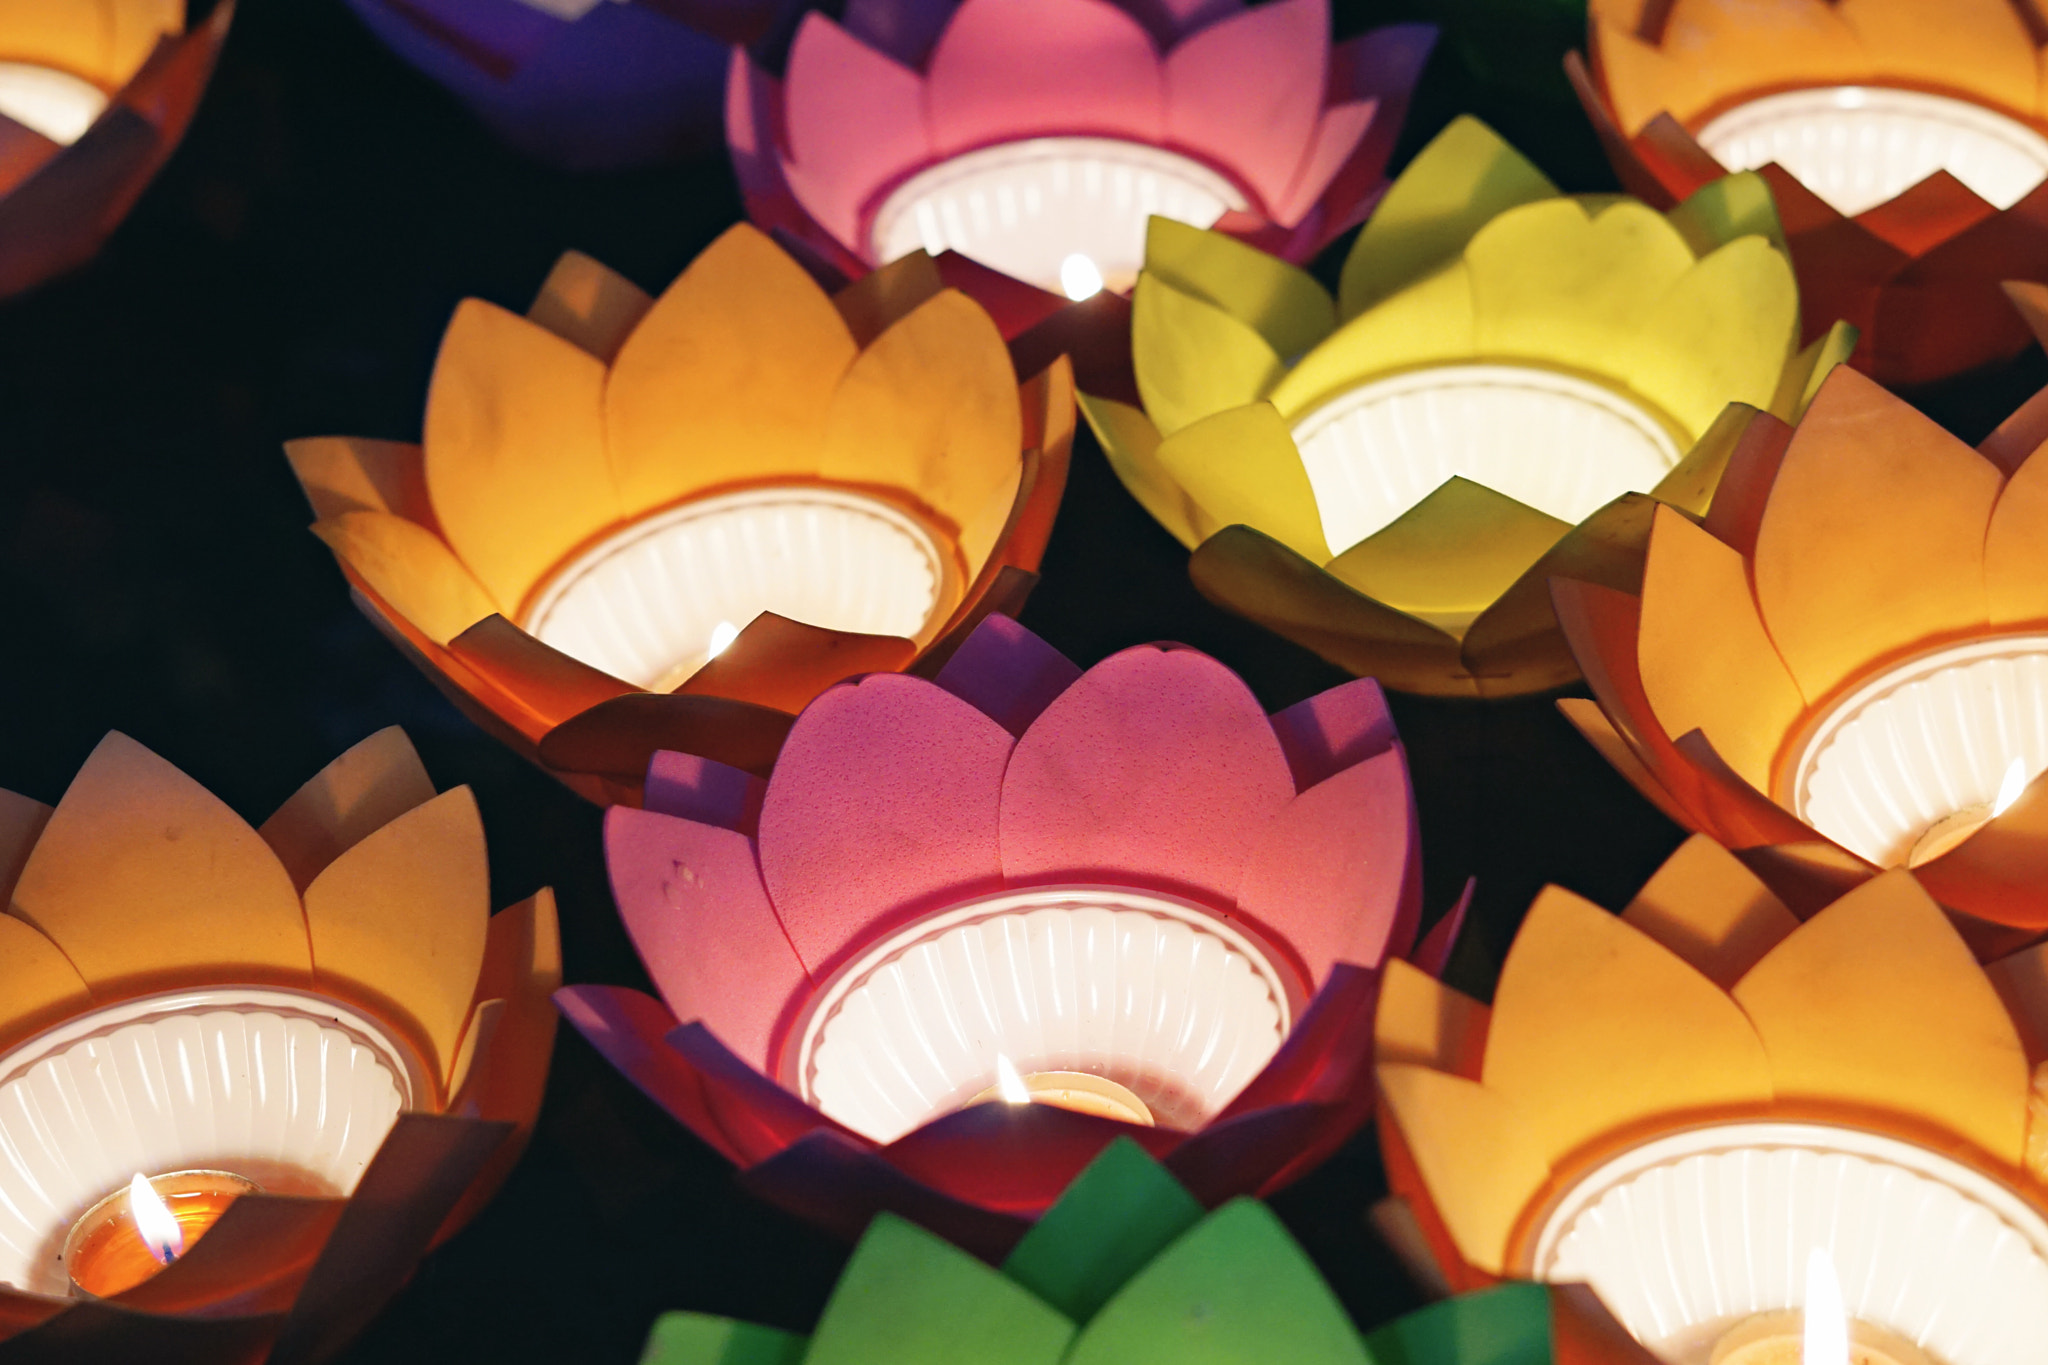 Sony a6000 sample photo. Flower garlands and coloured lanterns festival photography